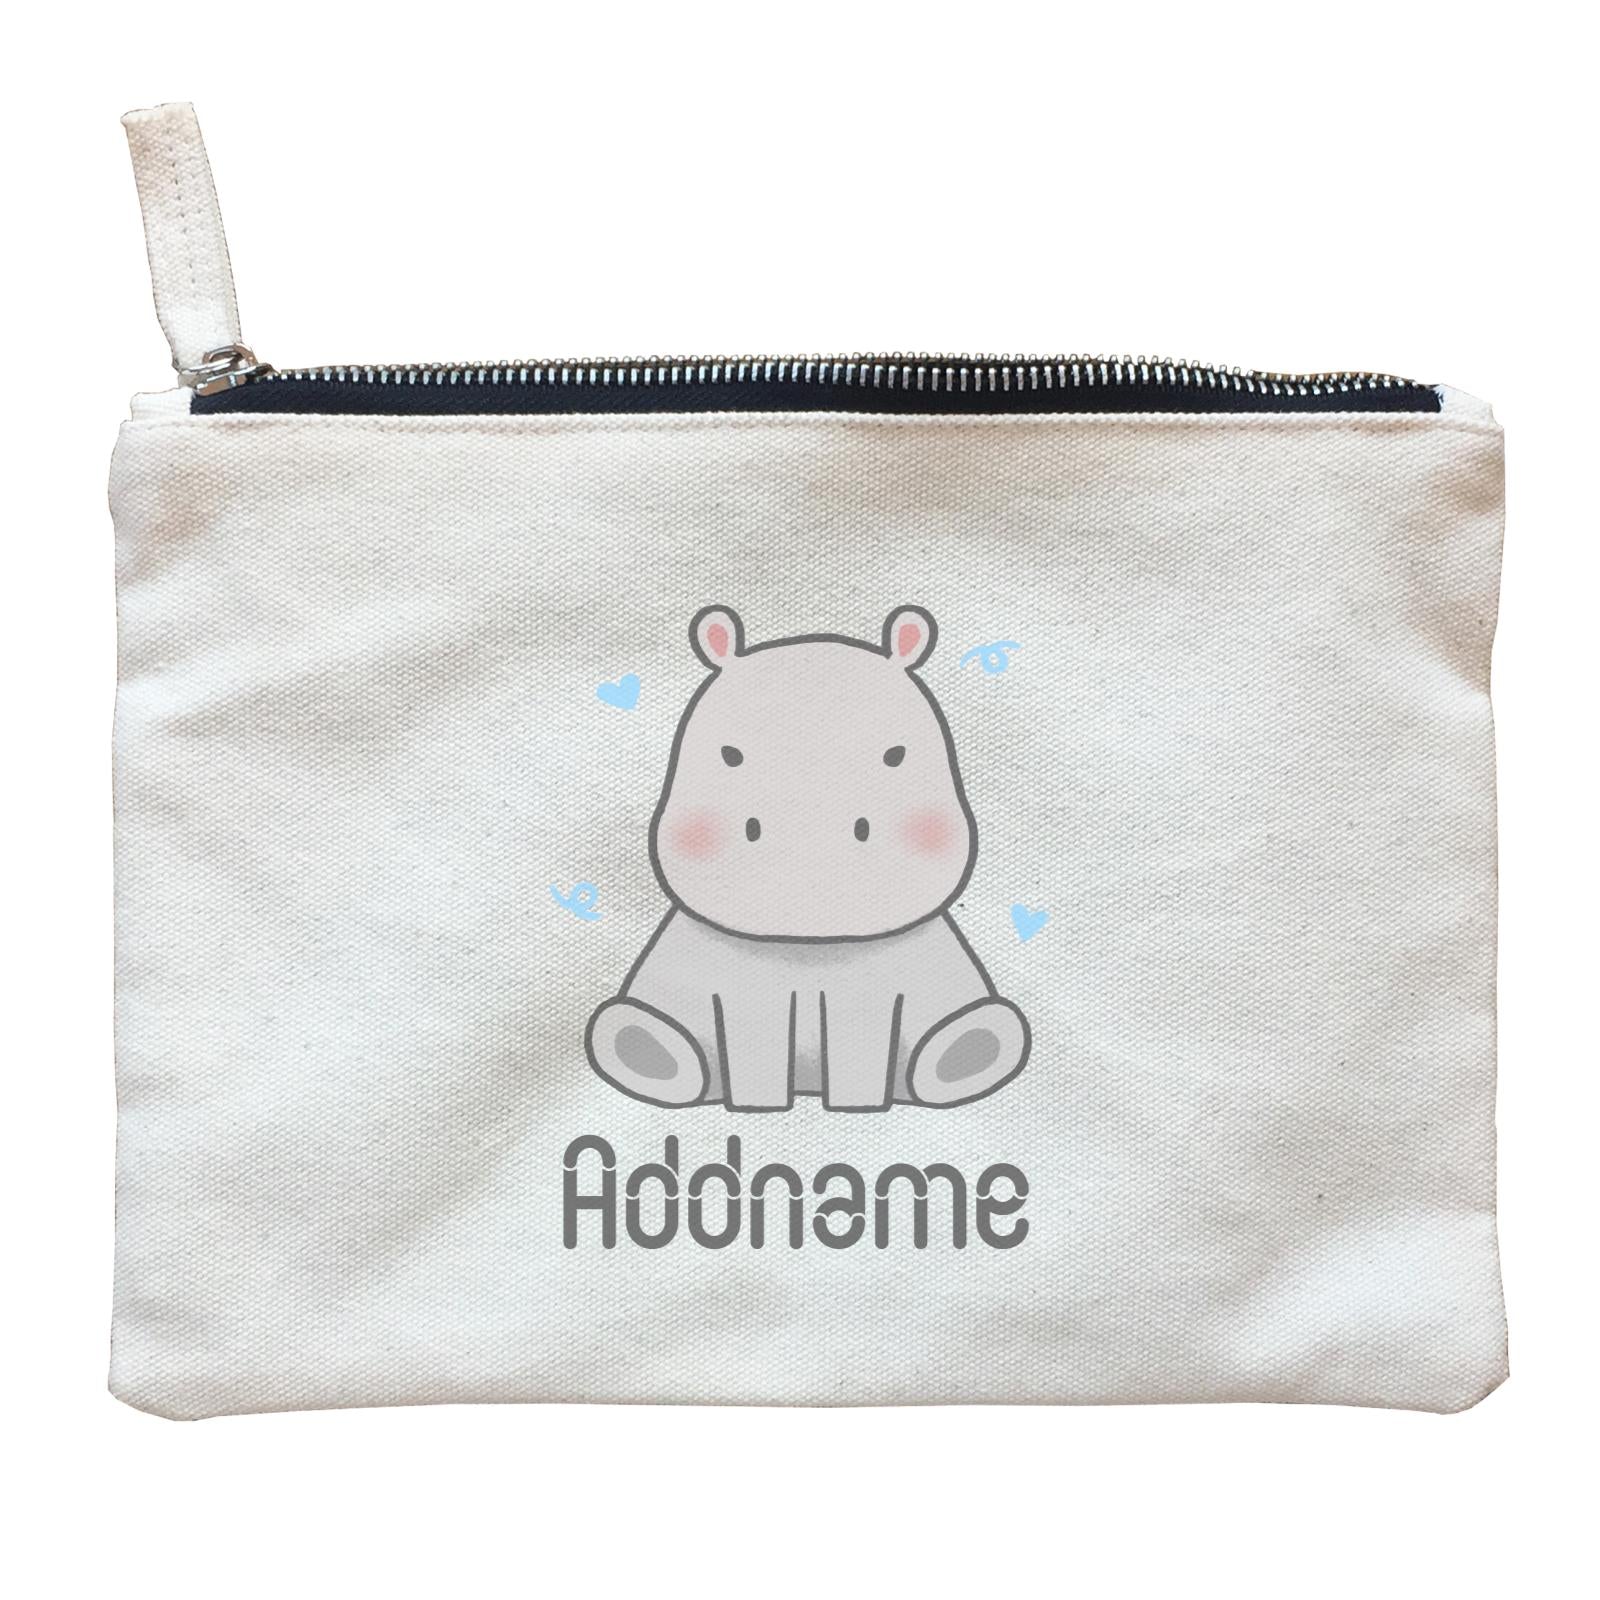 Cute Hand Drawn Style Hippo Addname Zipper Pouch